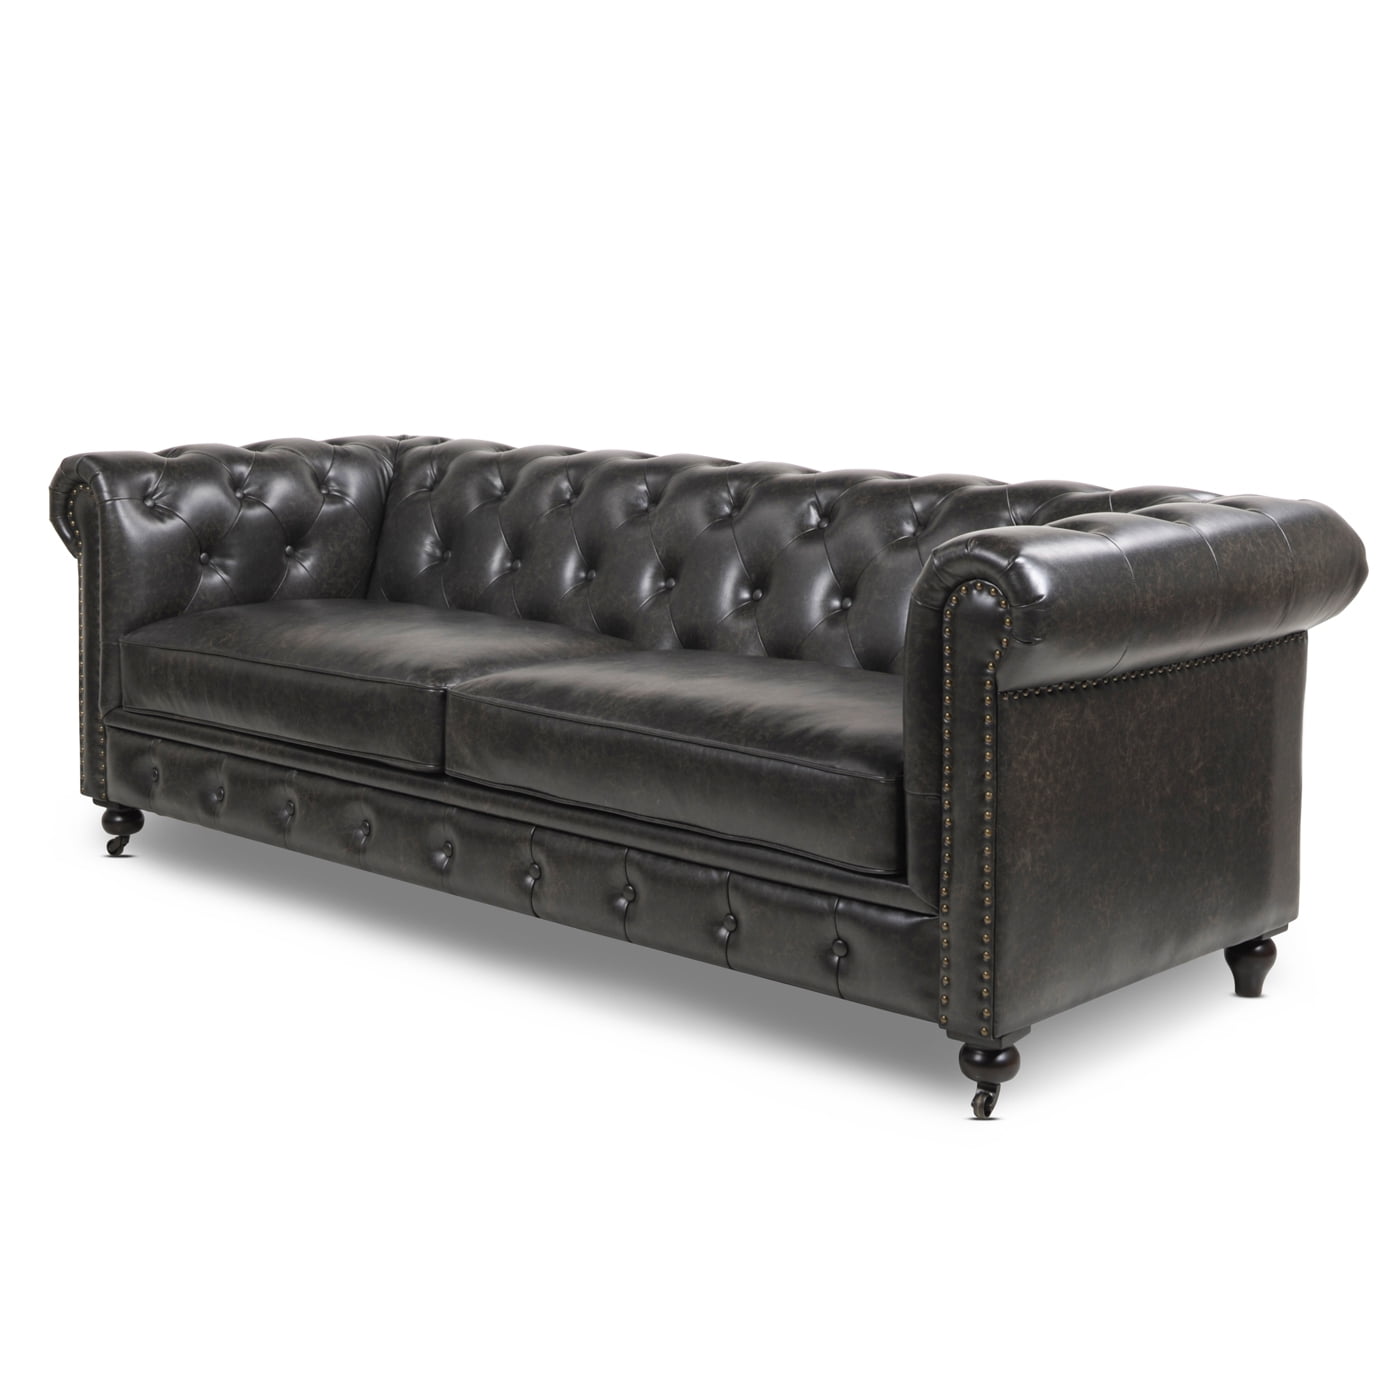 Jennifer Taylor Home Winston Leather, Tufted Leather Chesterfield Sofa